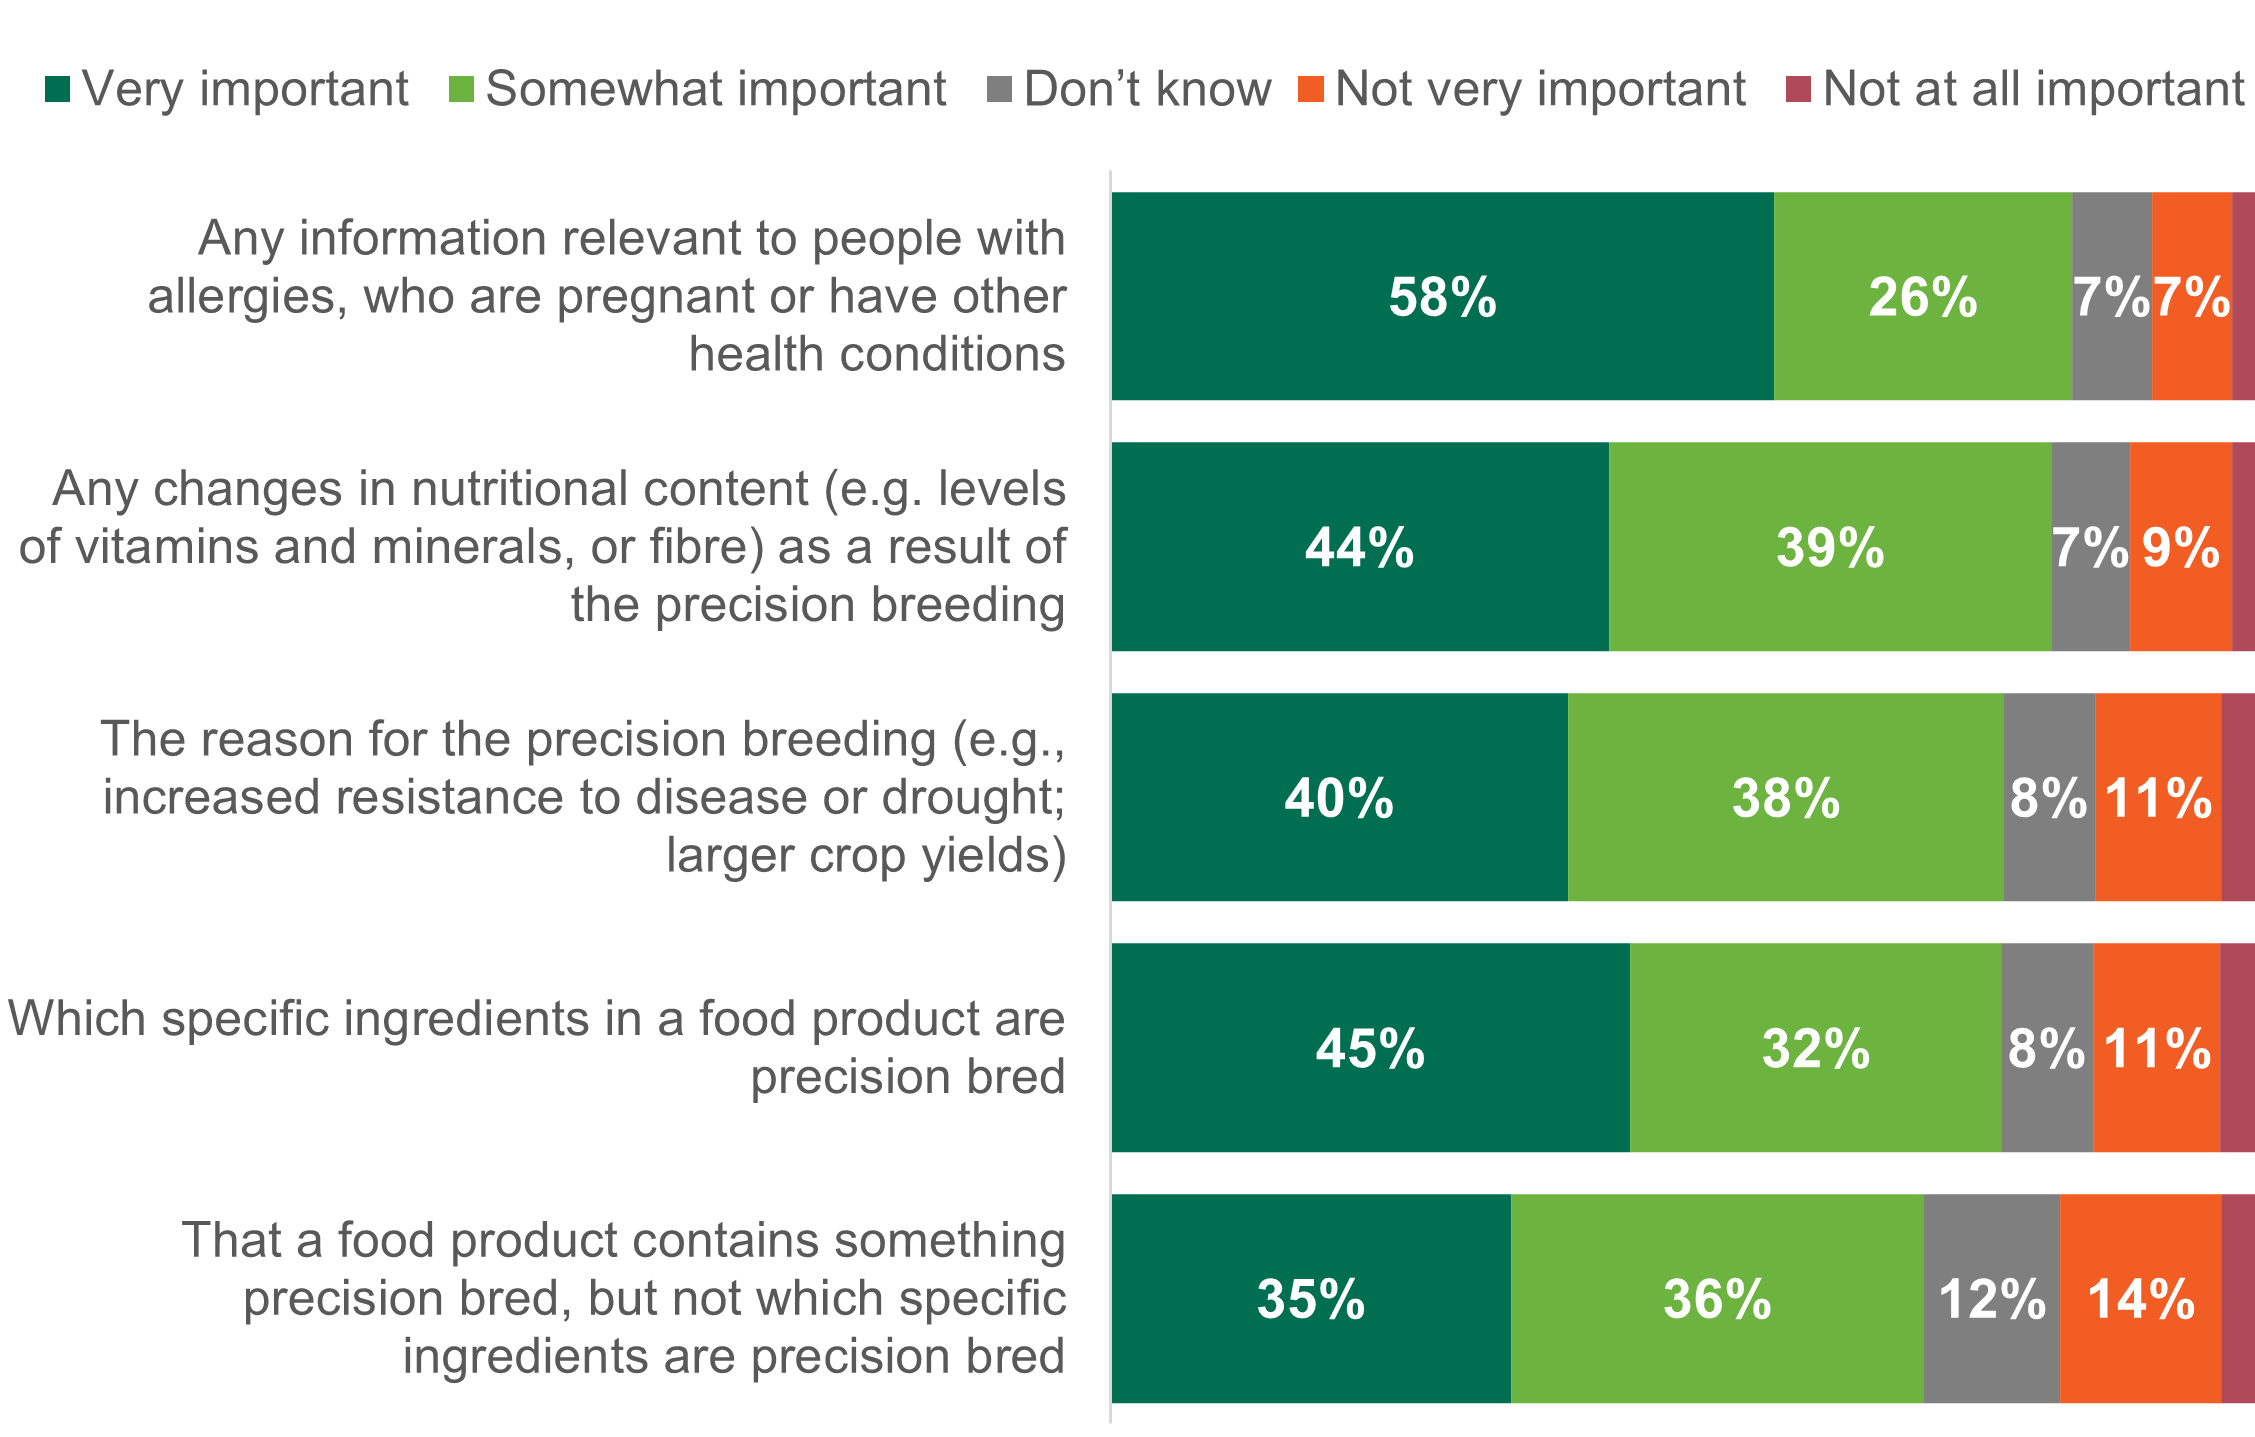 Graph to show how important it was for consumers to have certain information about precision breed foods